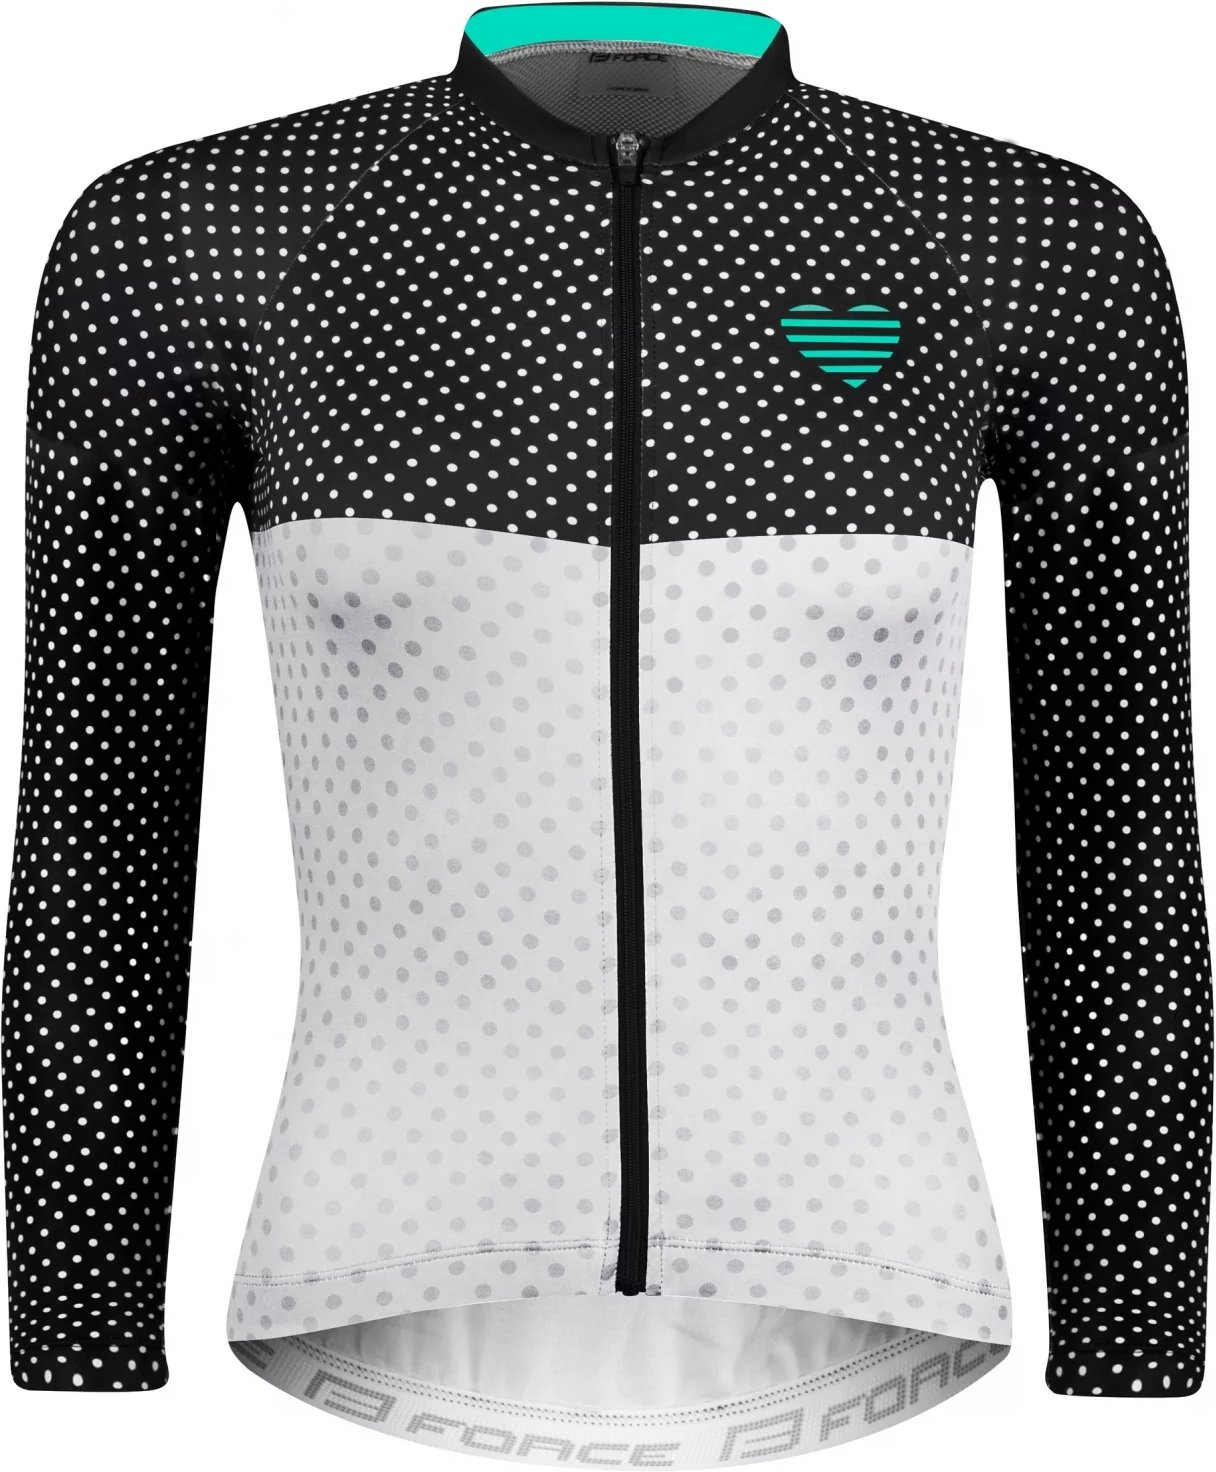 Force Points Lady L black/white/turquoise